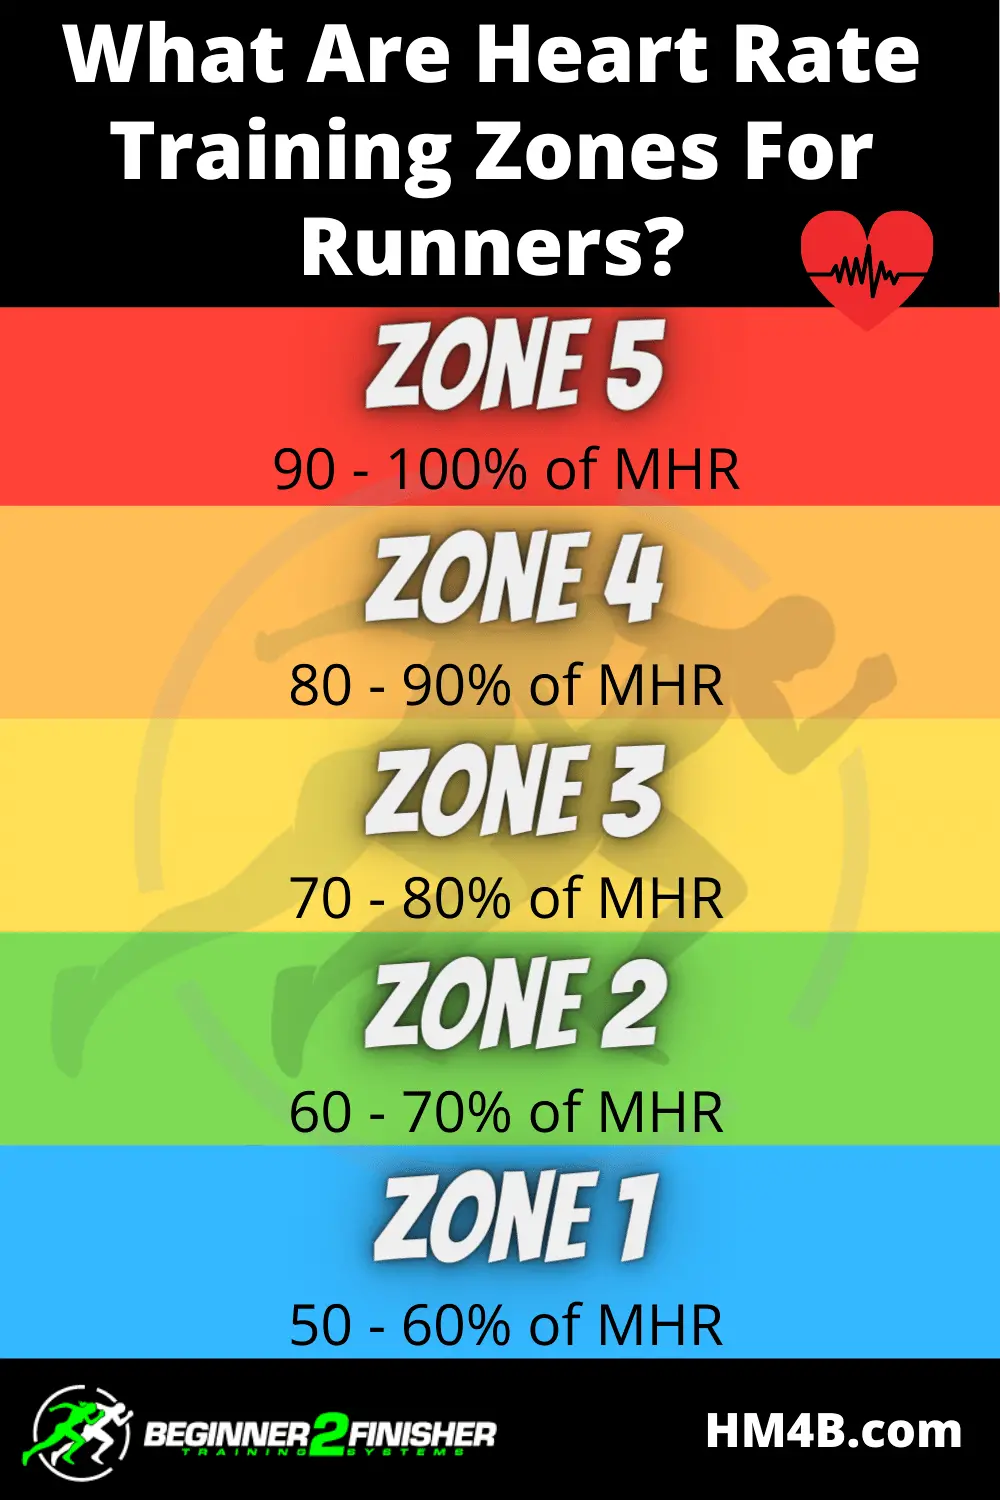 What Are Heart Rate Training Zones For Runners?